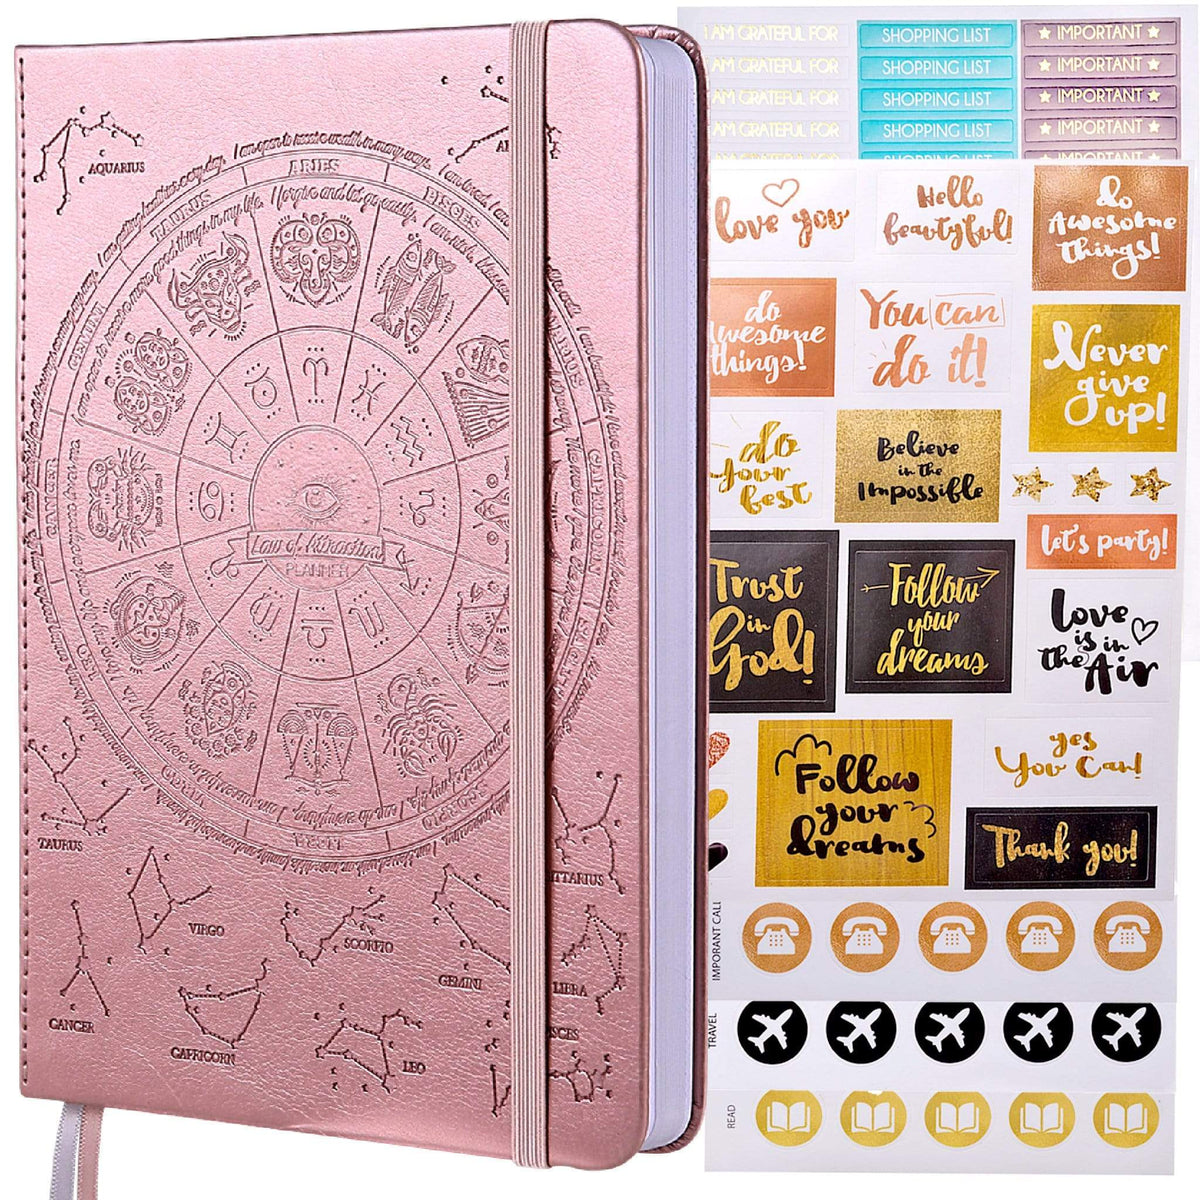 Deluxe Undated 90-Day Daily Planner (A5 Size: 6 x 8.5 inches